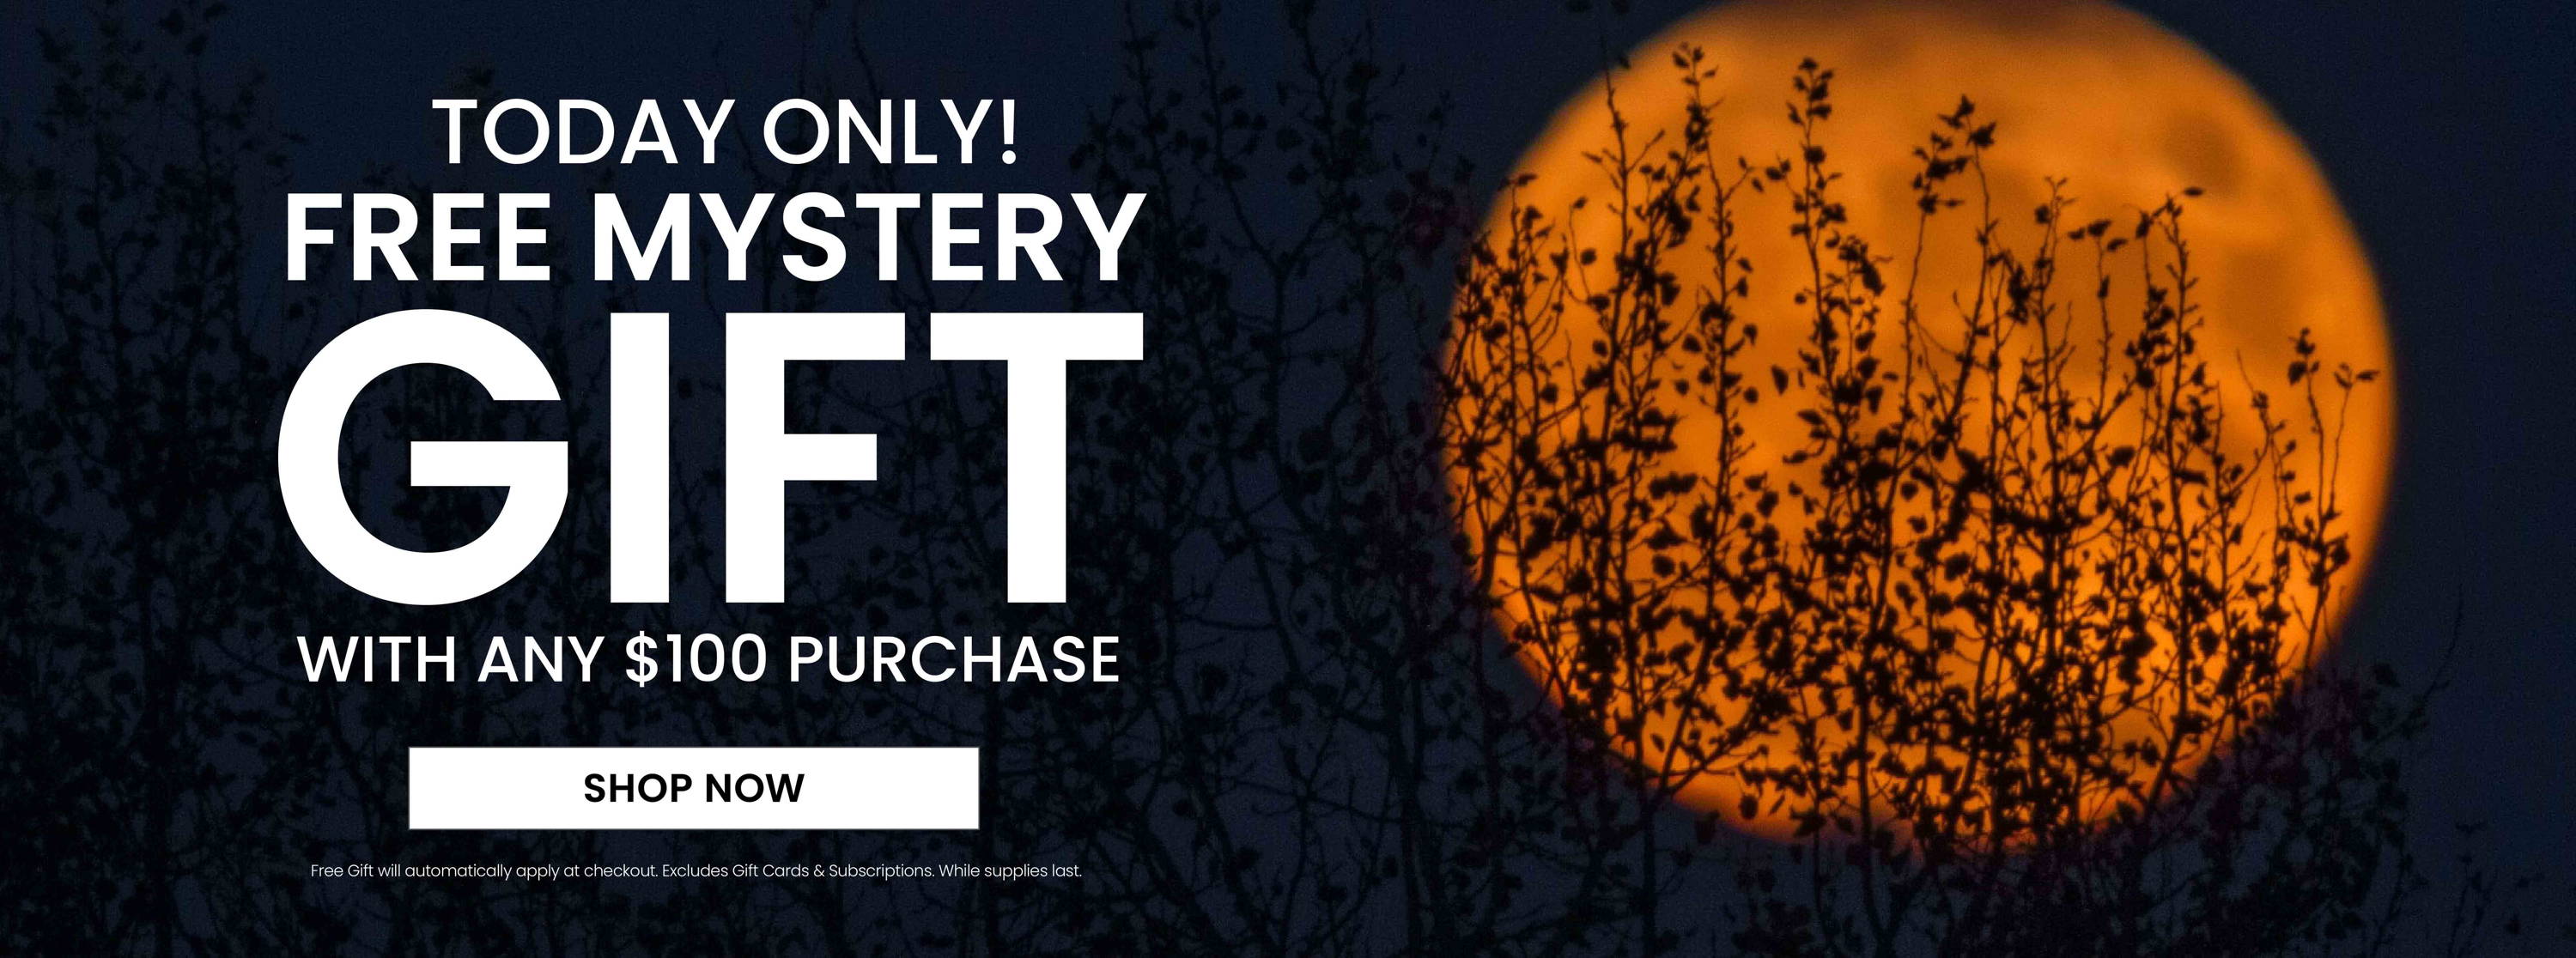 Today Only! Free Mystery Gift with any $100 purchase.